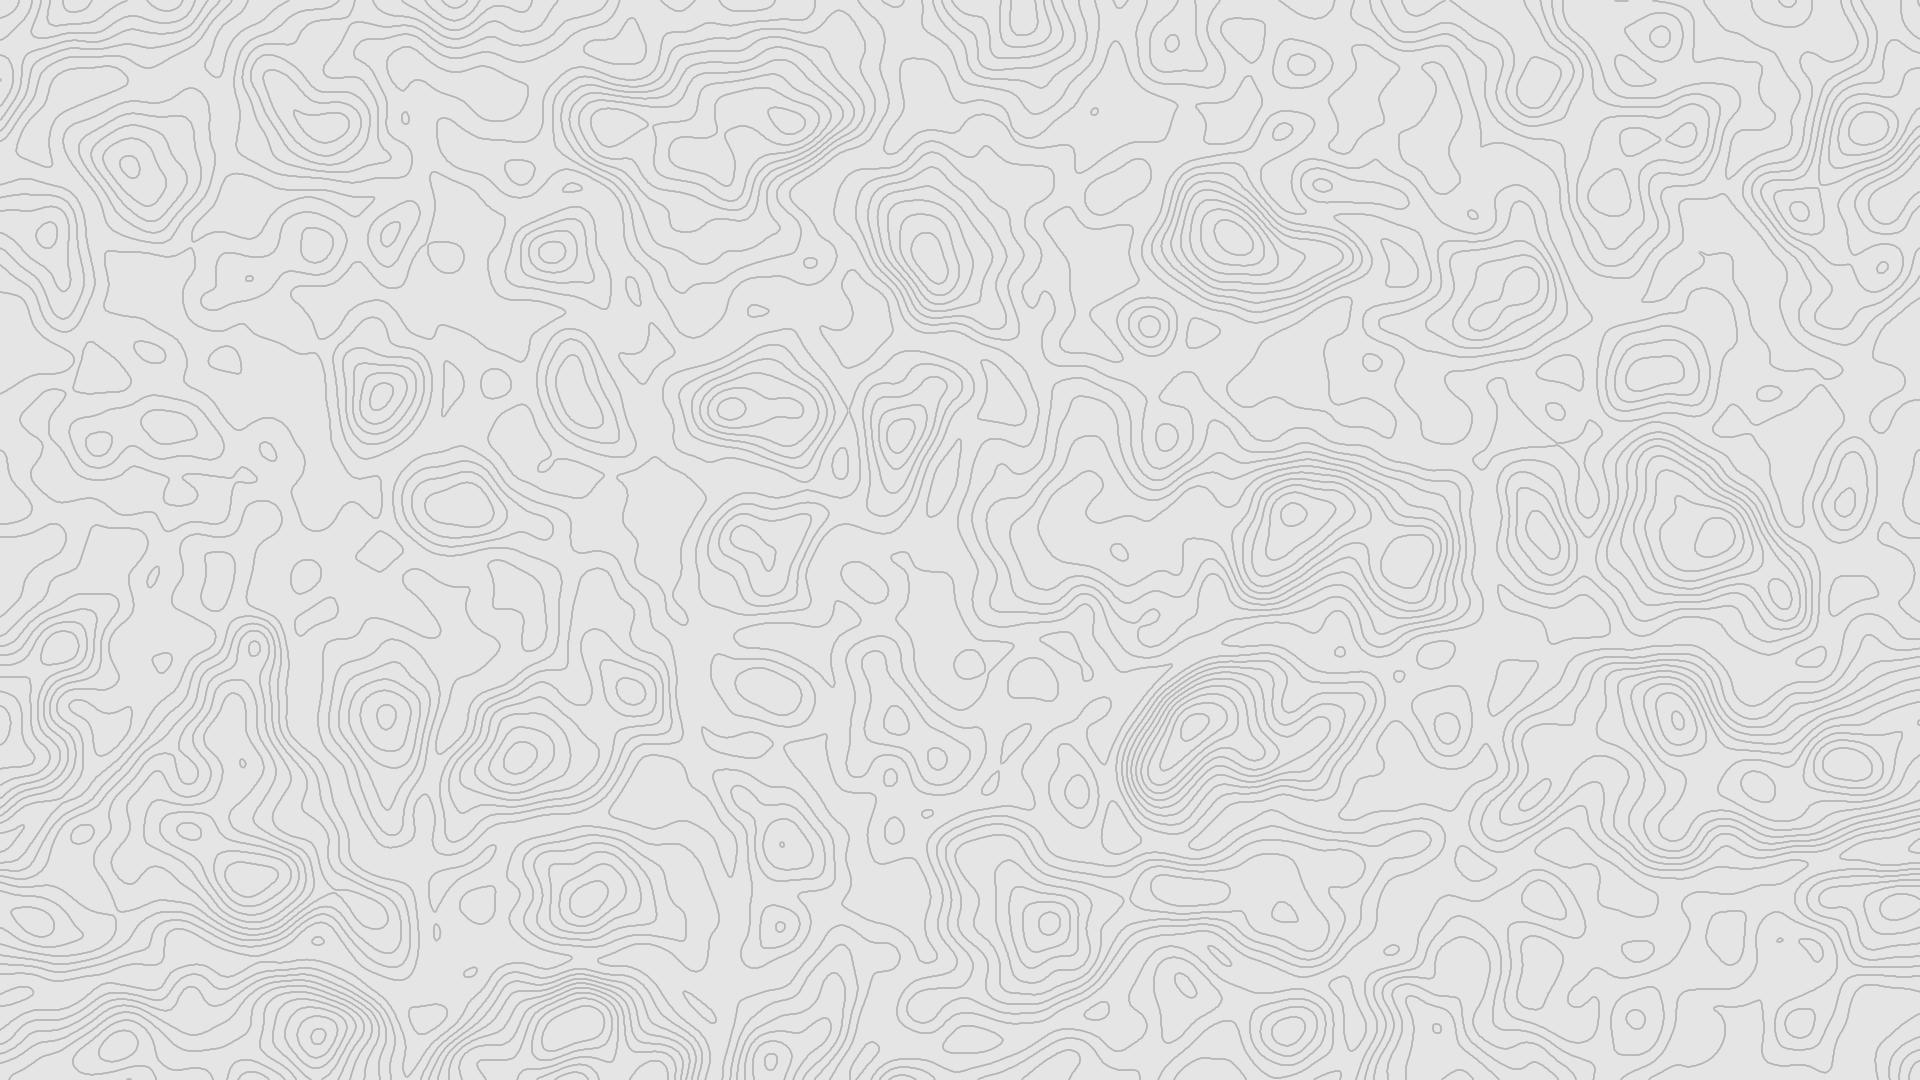 Topography Wallpaper, made